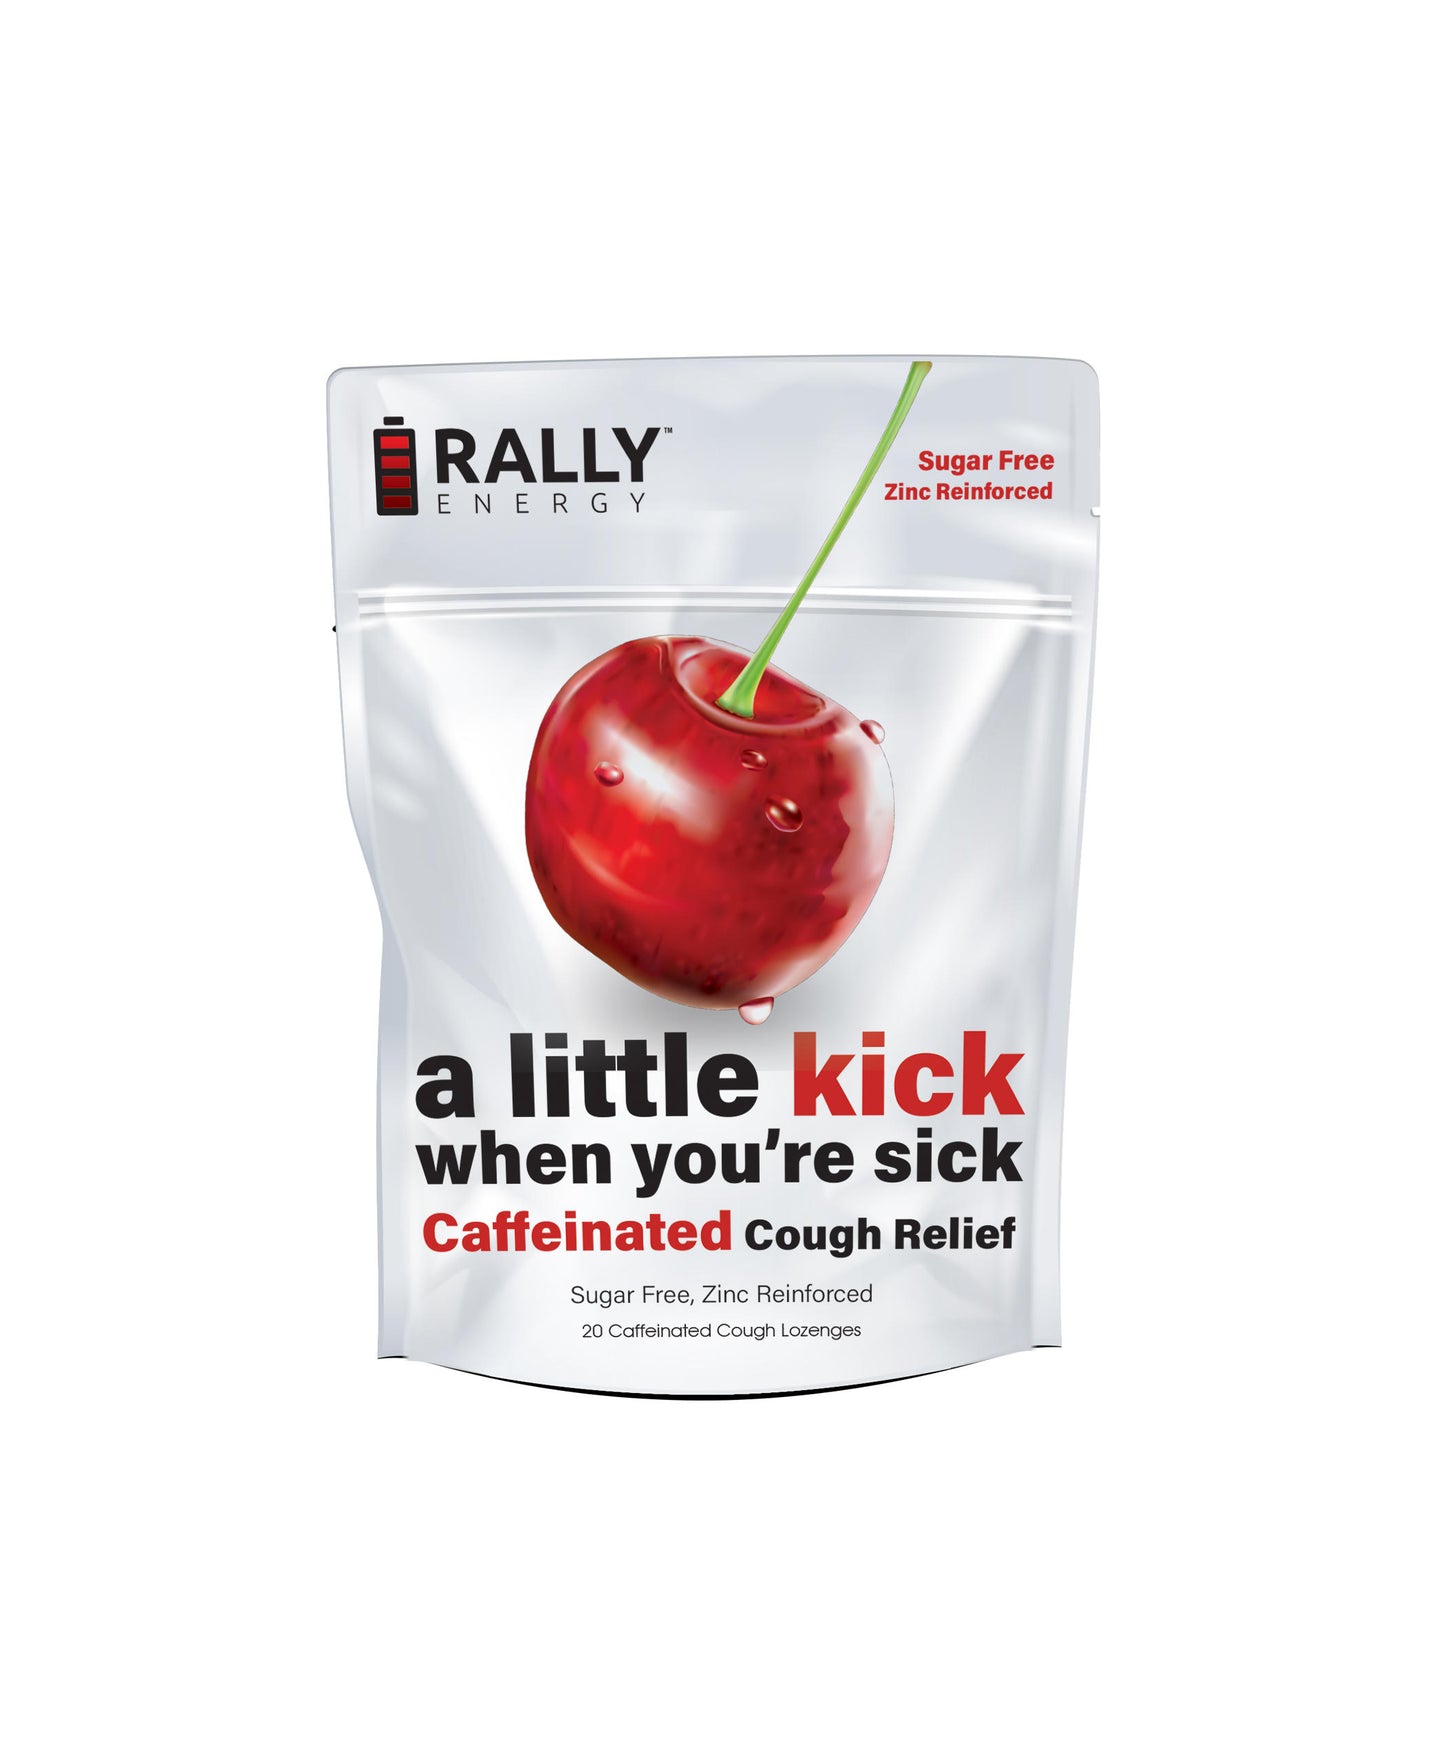 Rally Energy Cough Relief - Caffeinated, Cherry Flavored Cough Lozenges - Travel size